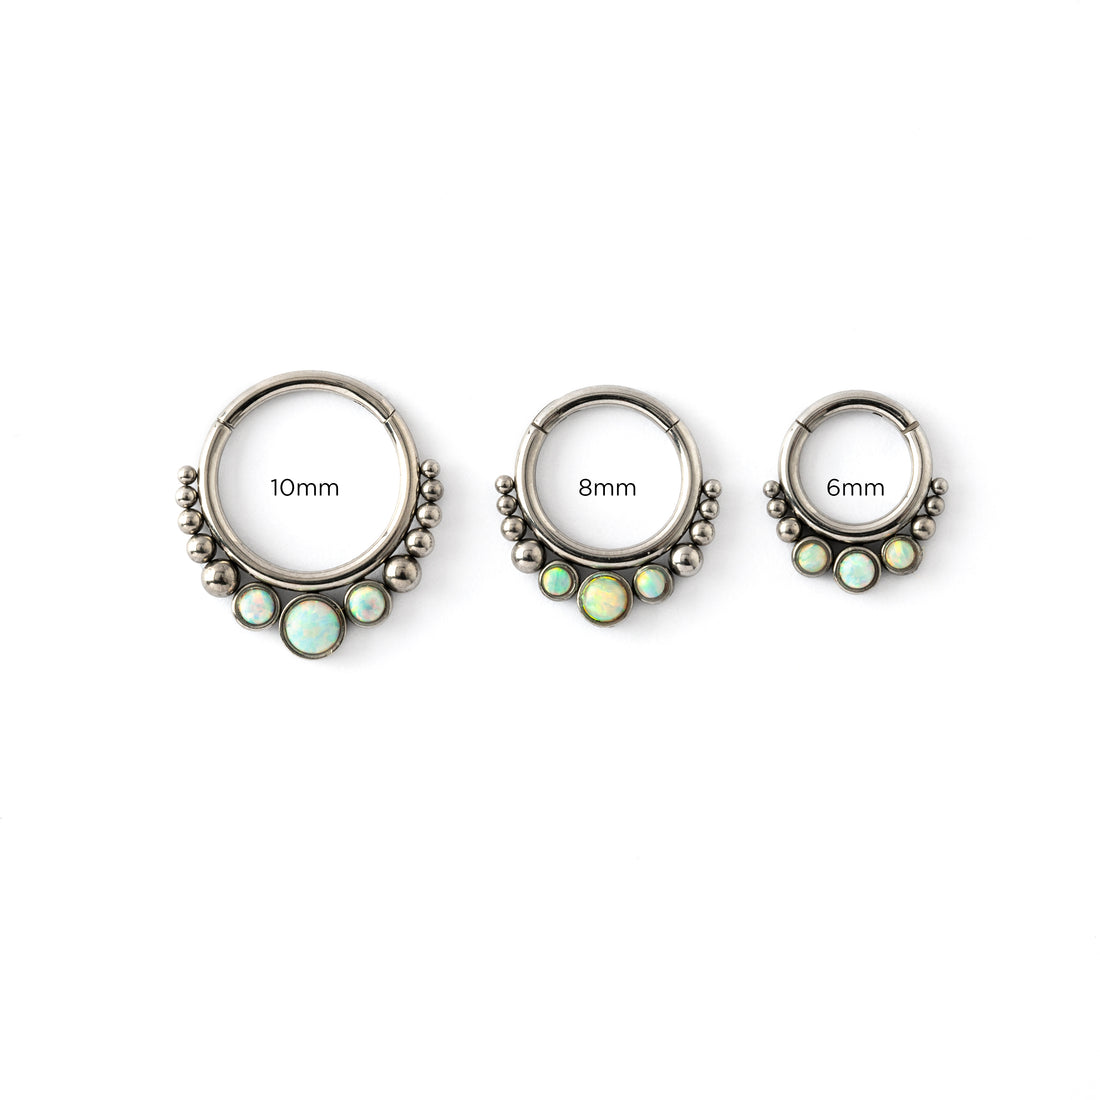 6mm, 8mm &amp; 10mm Surgical steel septum clicker rings with Opal frontal view